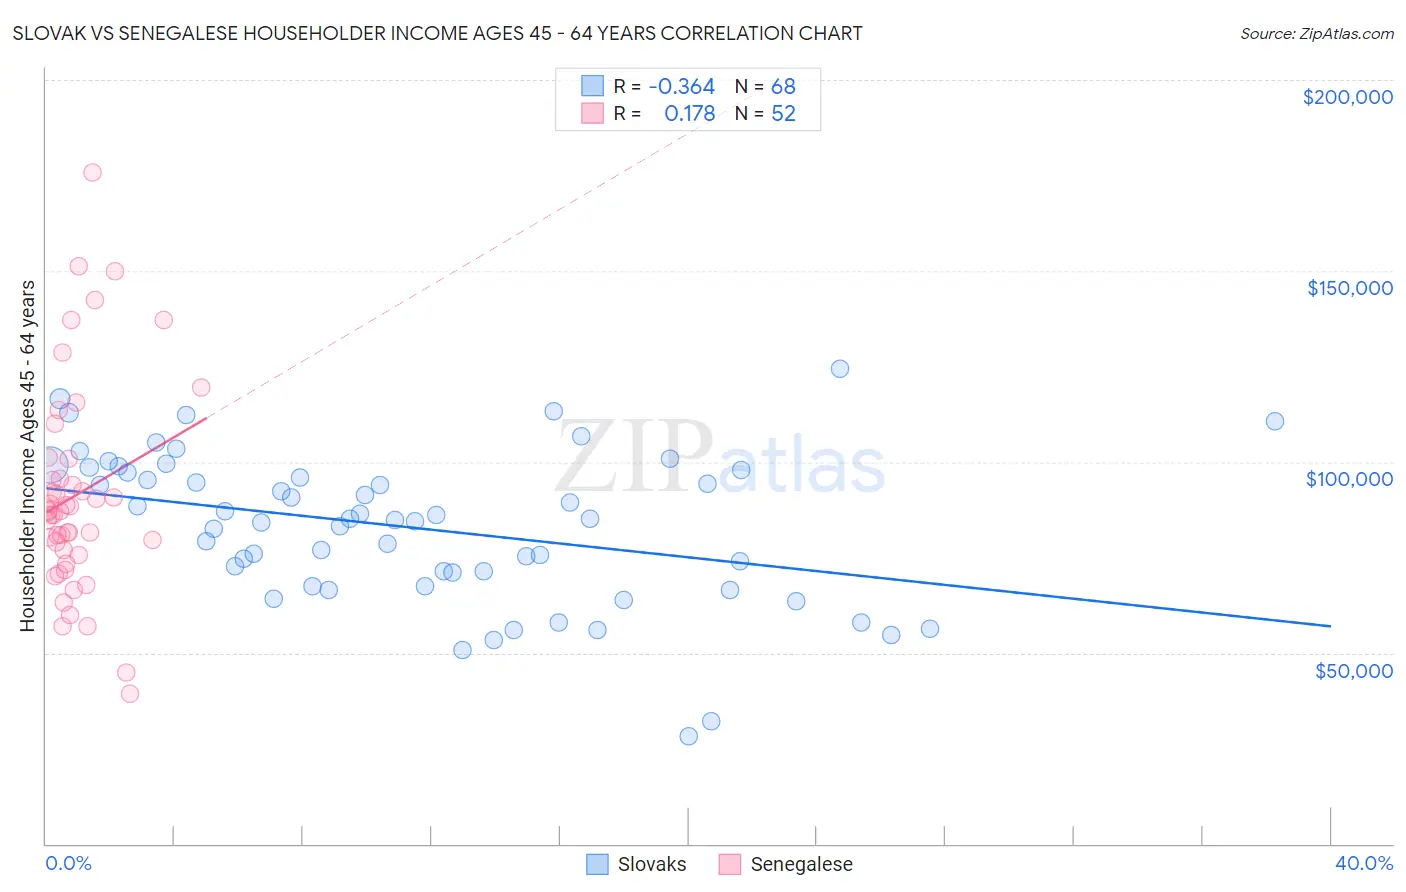 Slovak vs Senegalese Householder Income Ages 45 - 64 years